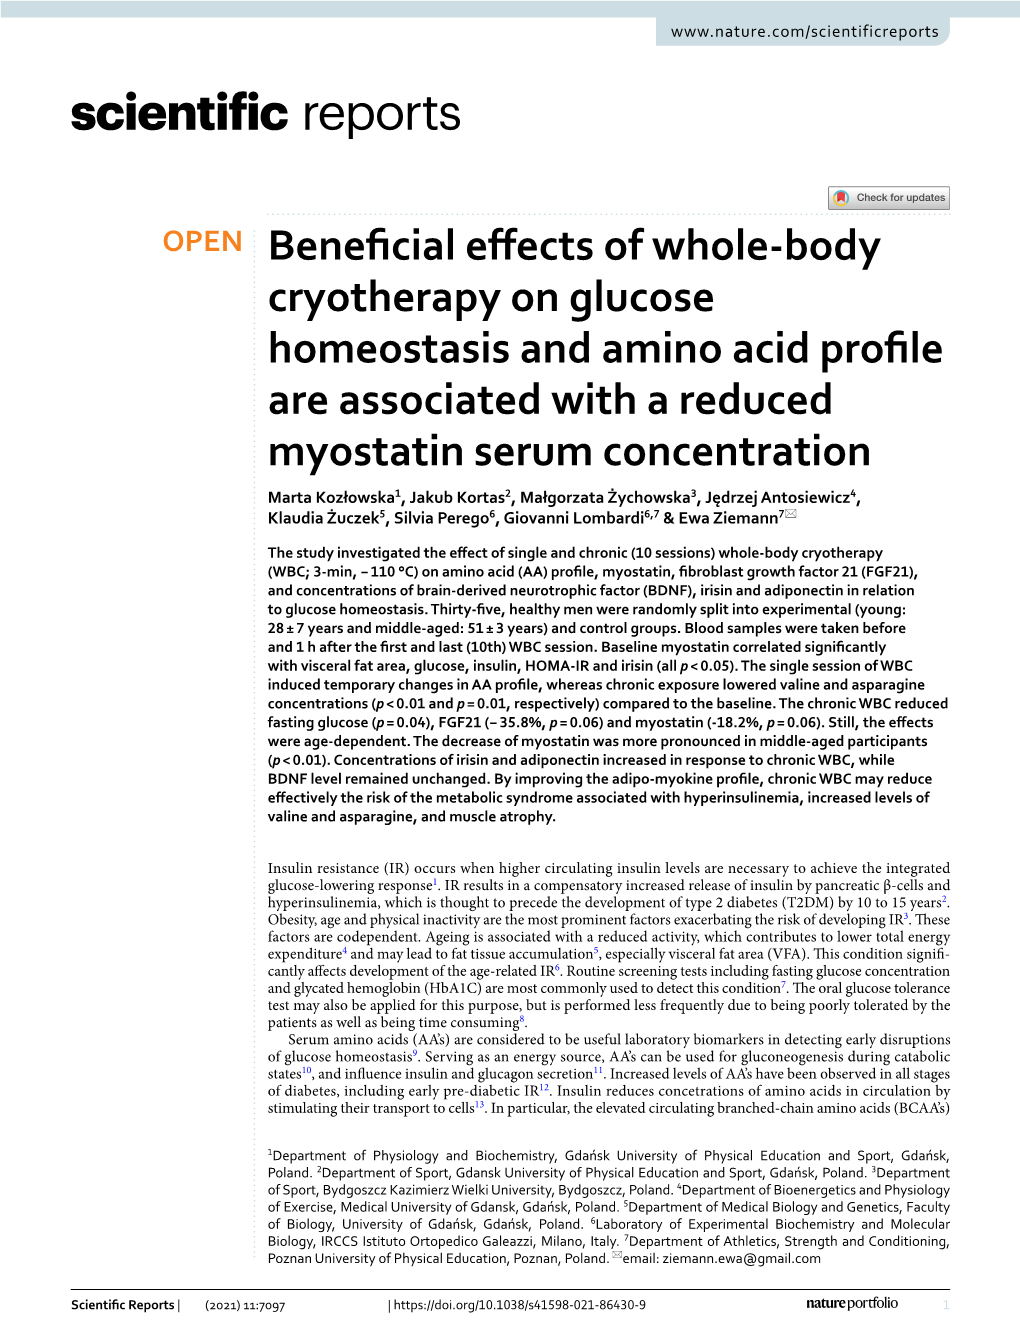 Beneficial Effects of Whole-Body Cryotherapy on Glucose Homeostasis and Amino Acid Profile Are Associated with a Reduced Myostat